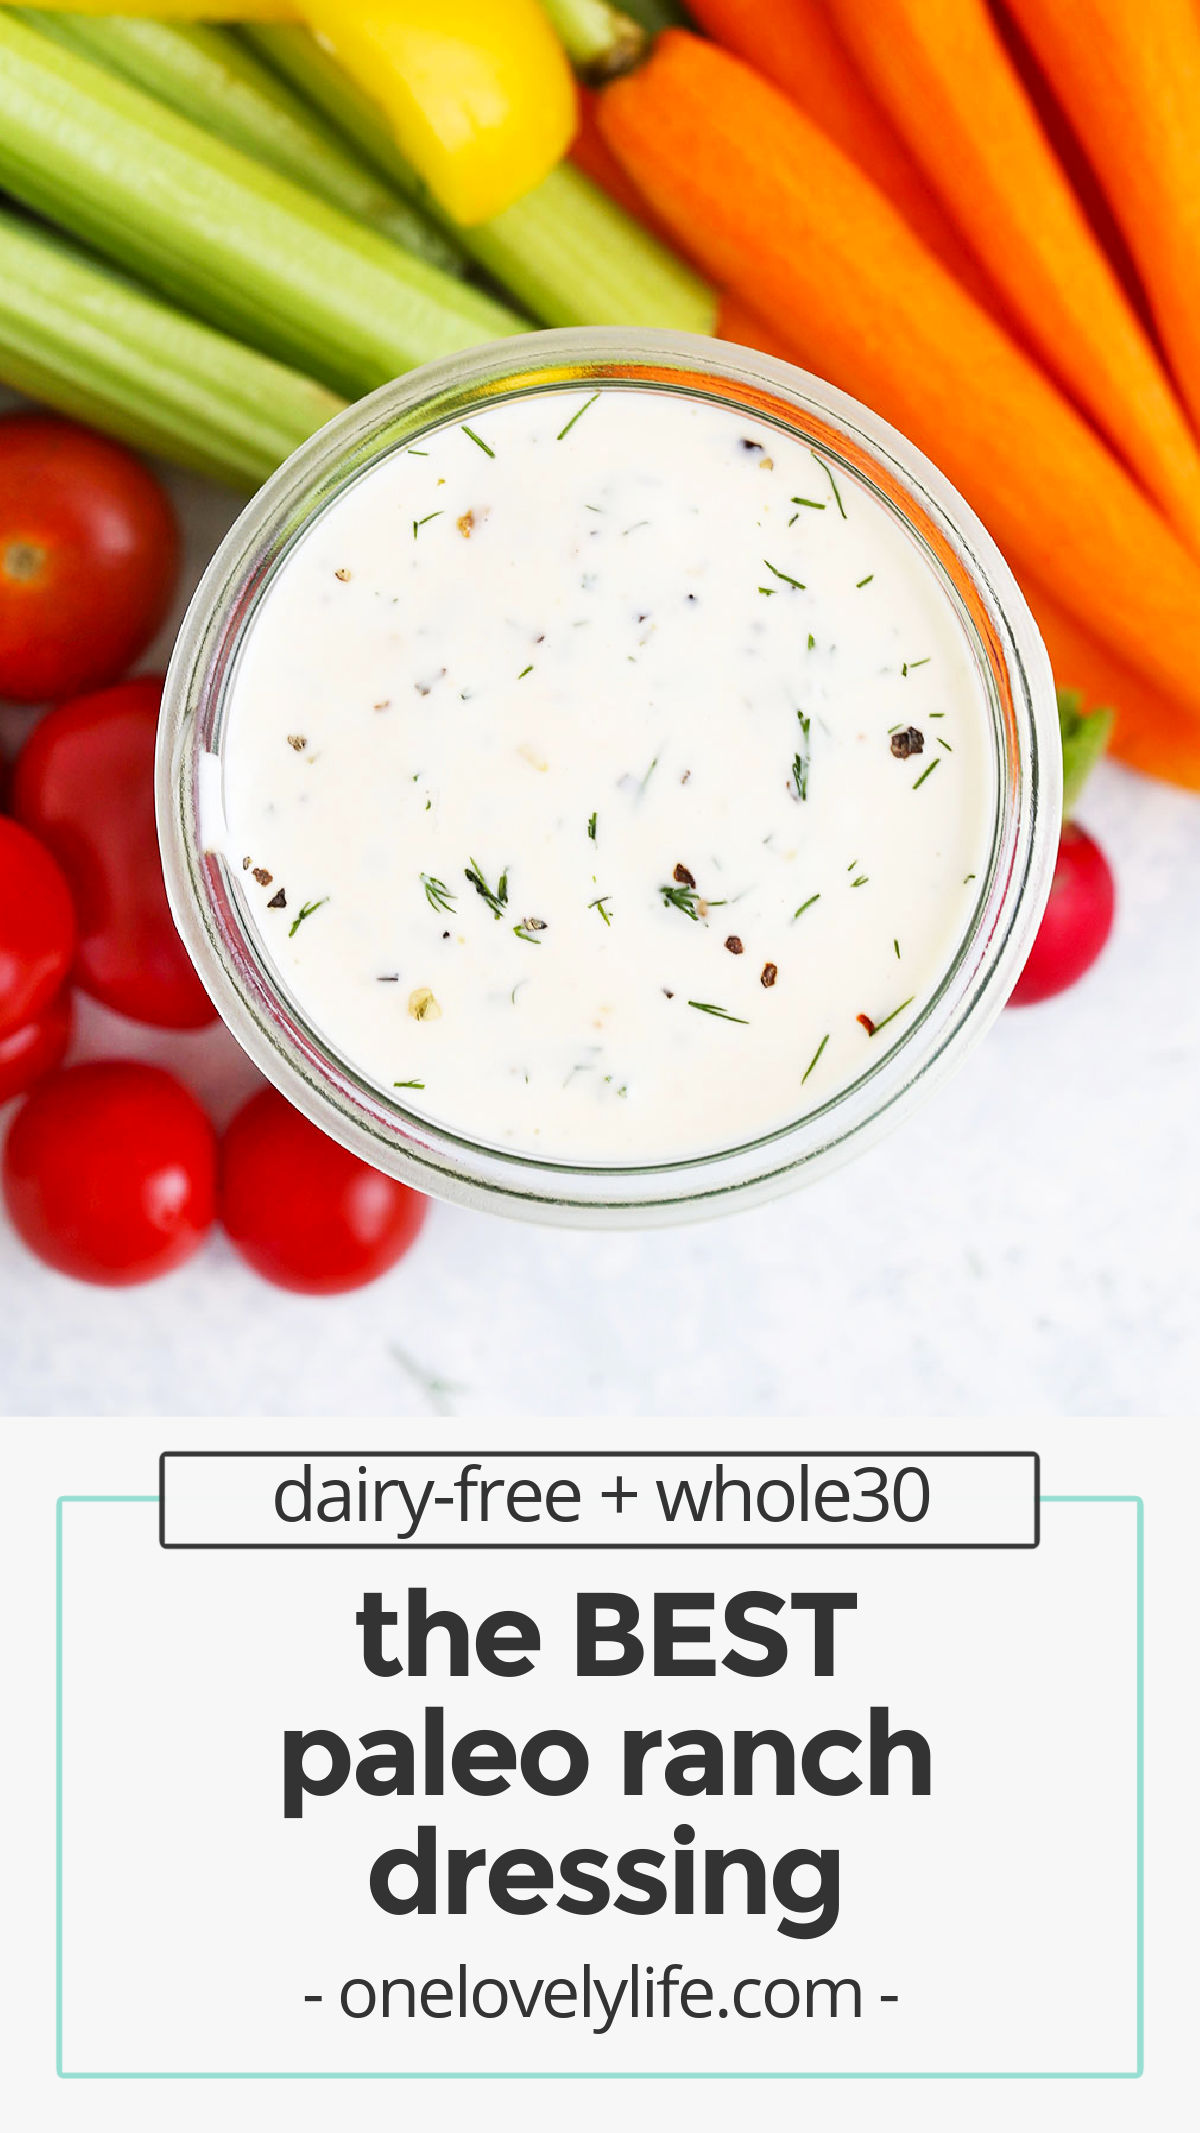 The BEST Paleo Ranch Dressing - This easy paleo ranch comes together in no time! Dairy free, gluten free, paleo and keto approved! // homemade ranch dressing recipe // dairy-free ranch dressing recipe // dump ranch // keto ranch dressing // paleo dump ranch dressing // whole30 dump ranch // easy ranch dressing // ranch dressing recipe no seasoning mix // healthy ranch dressing